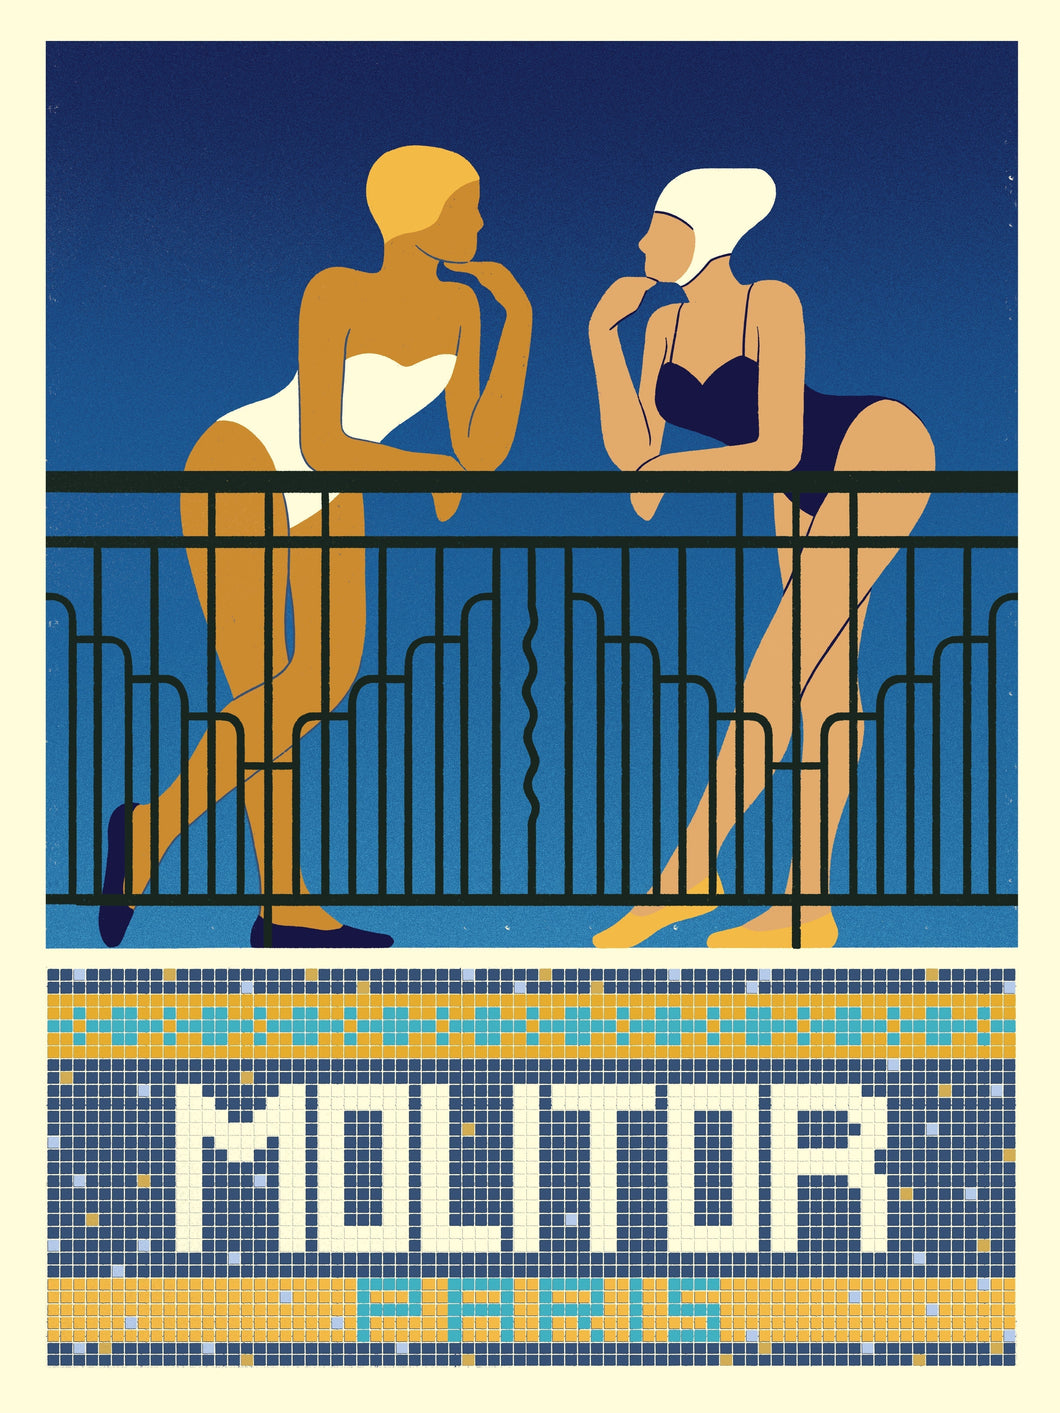 The Molitor # 3 poster by Paul NOX